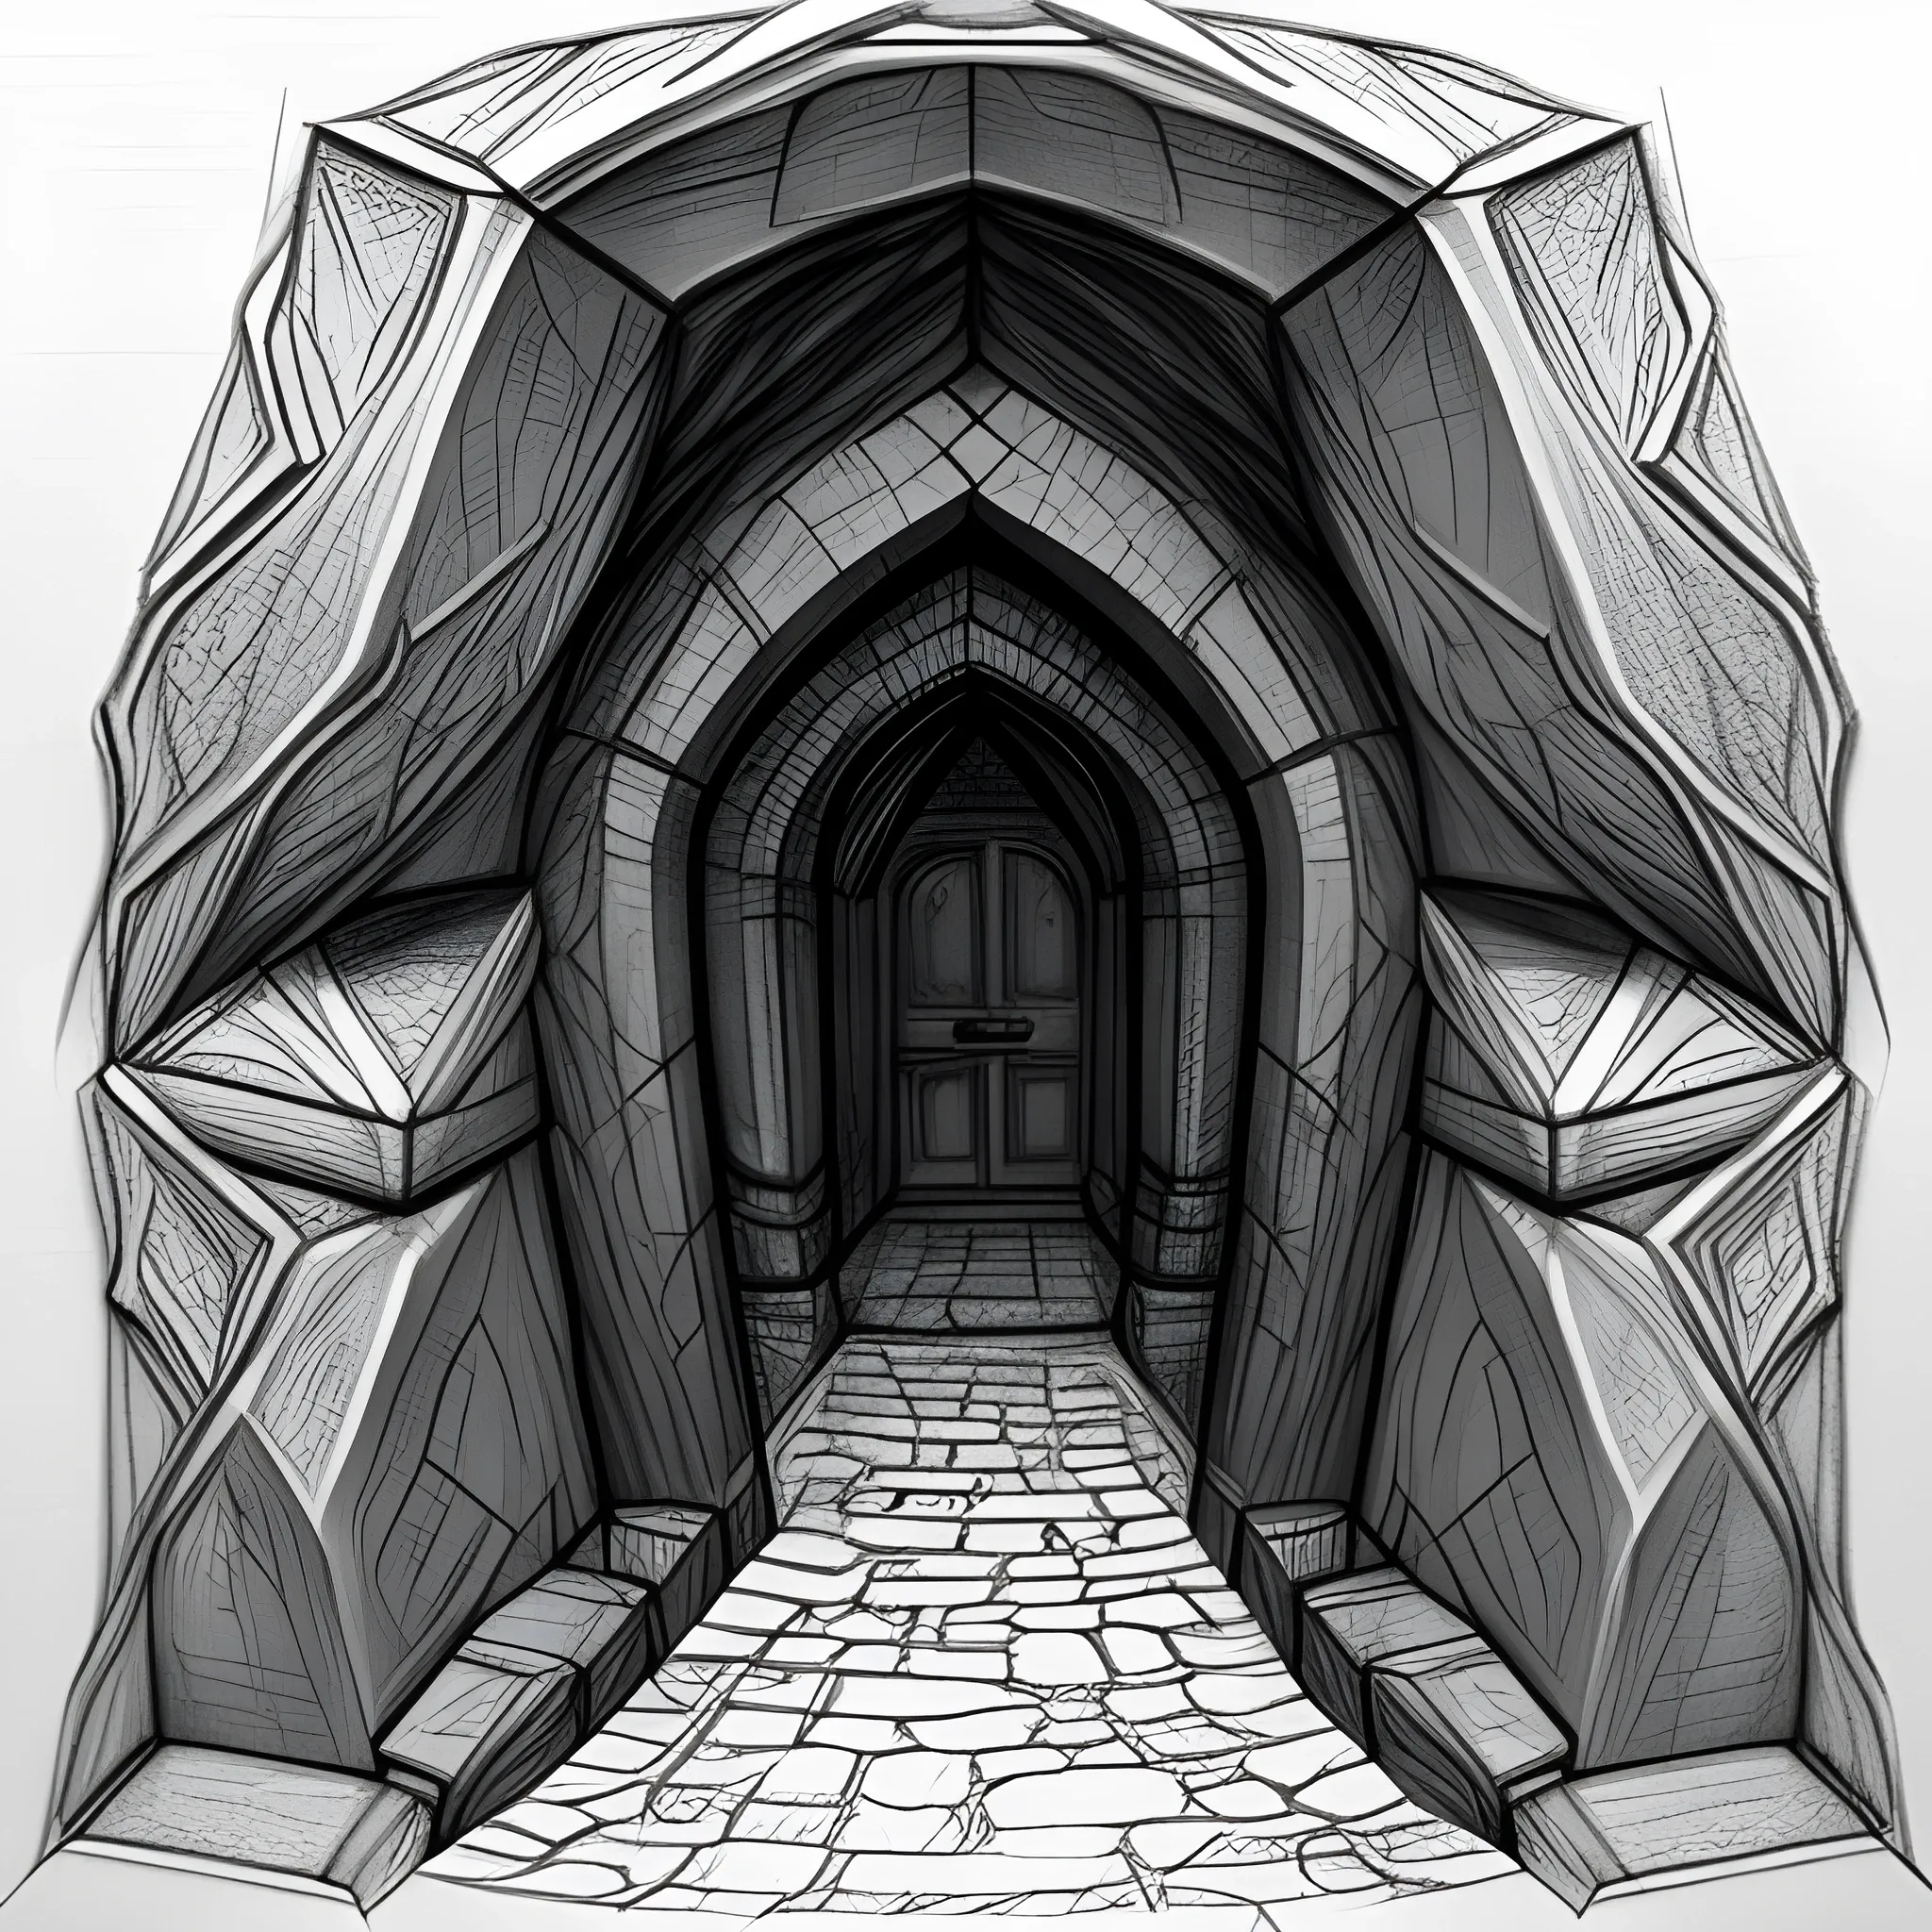 dnd high fantasy small cavern,  smooth walls, intricate detail, Pencil Sketch